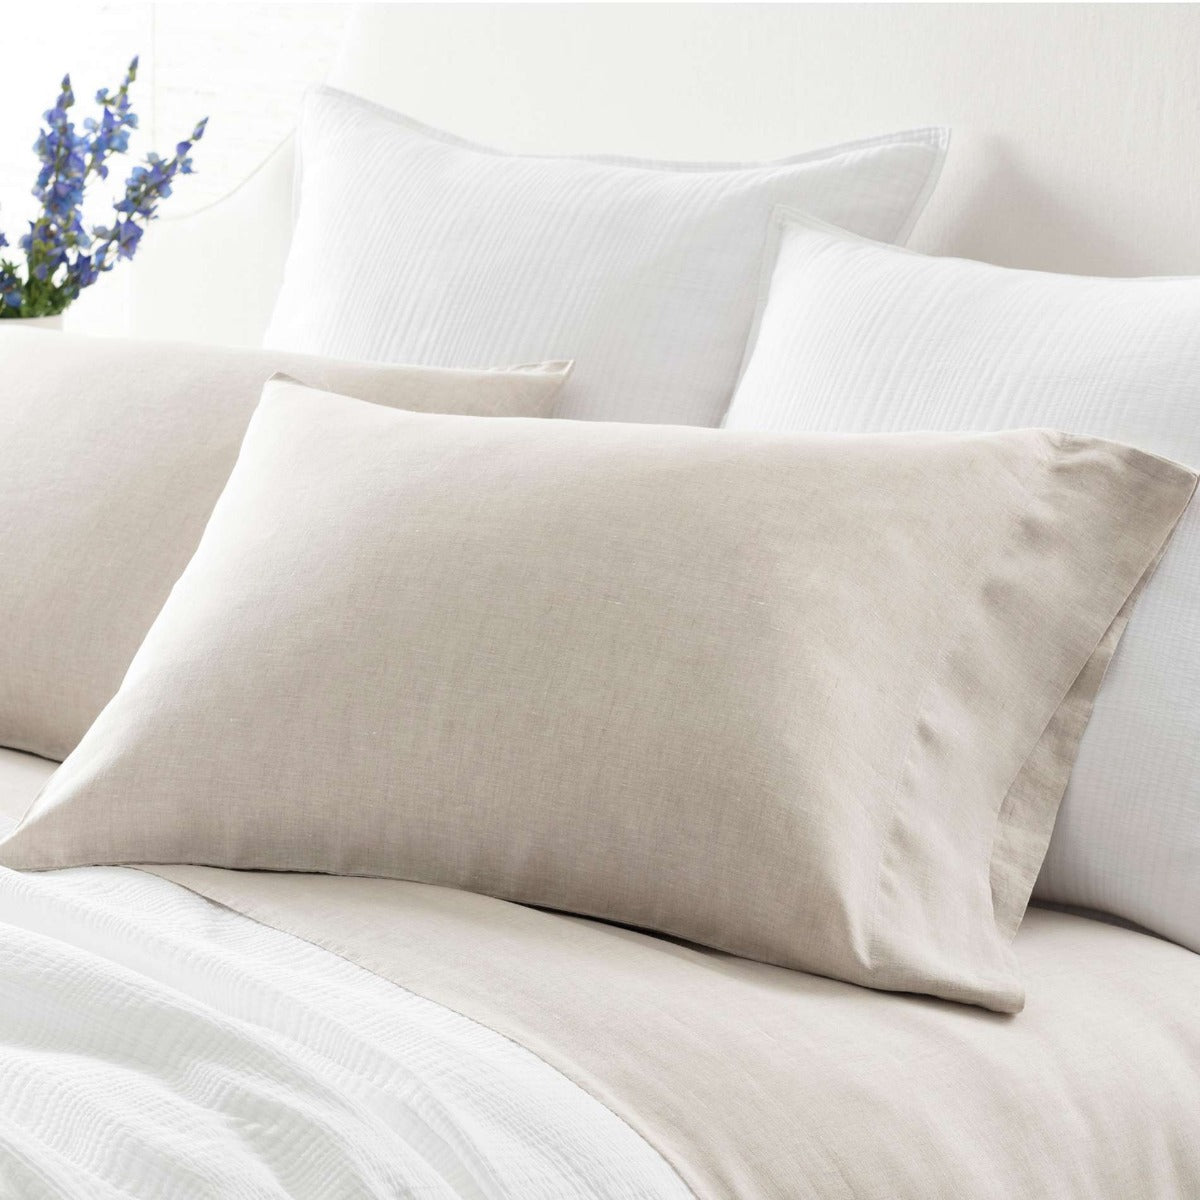 Lush Linen Natural Pillowcases styled with white bedding. Styled view.